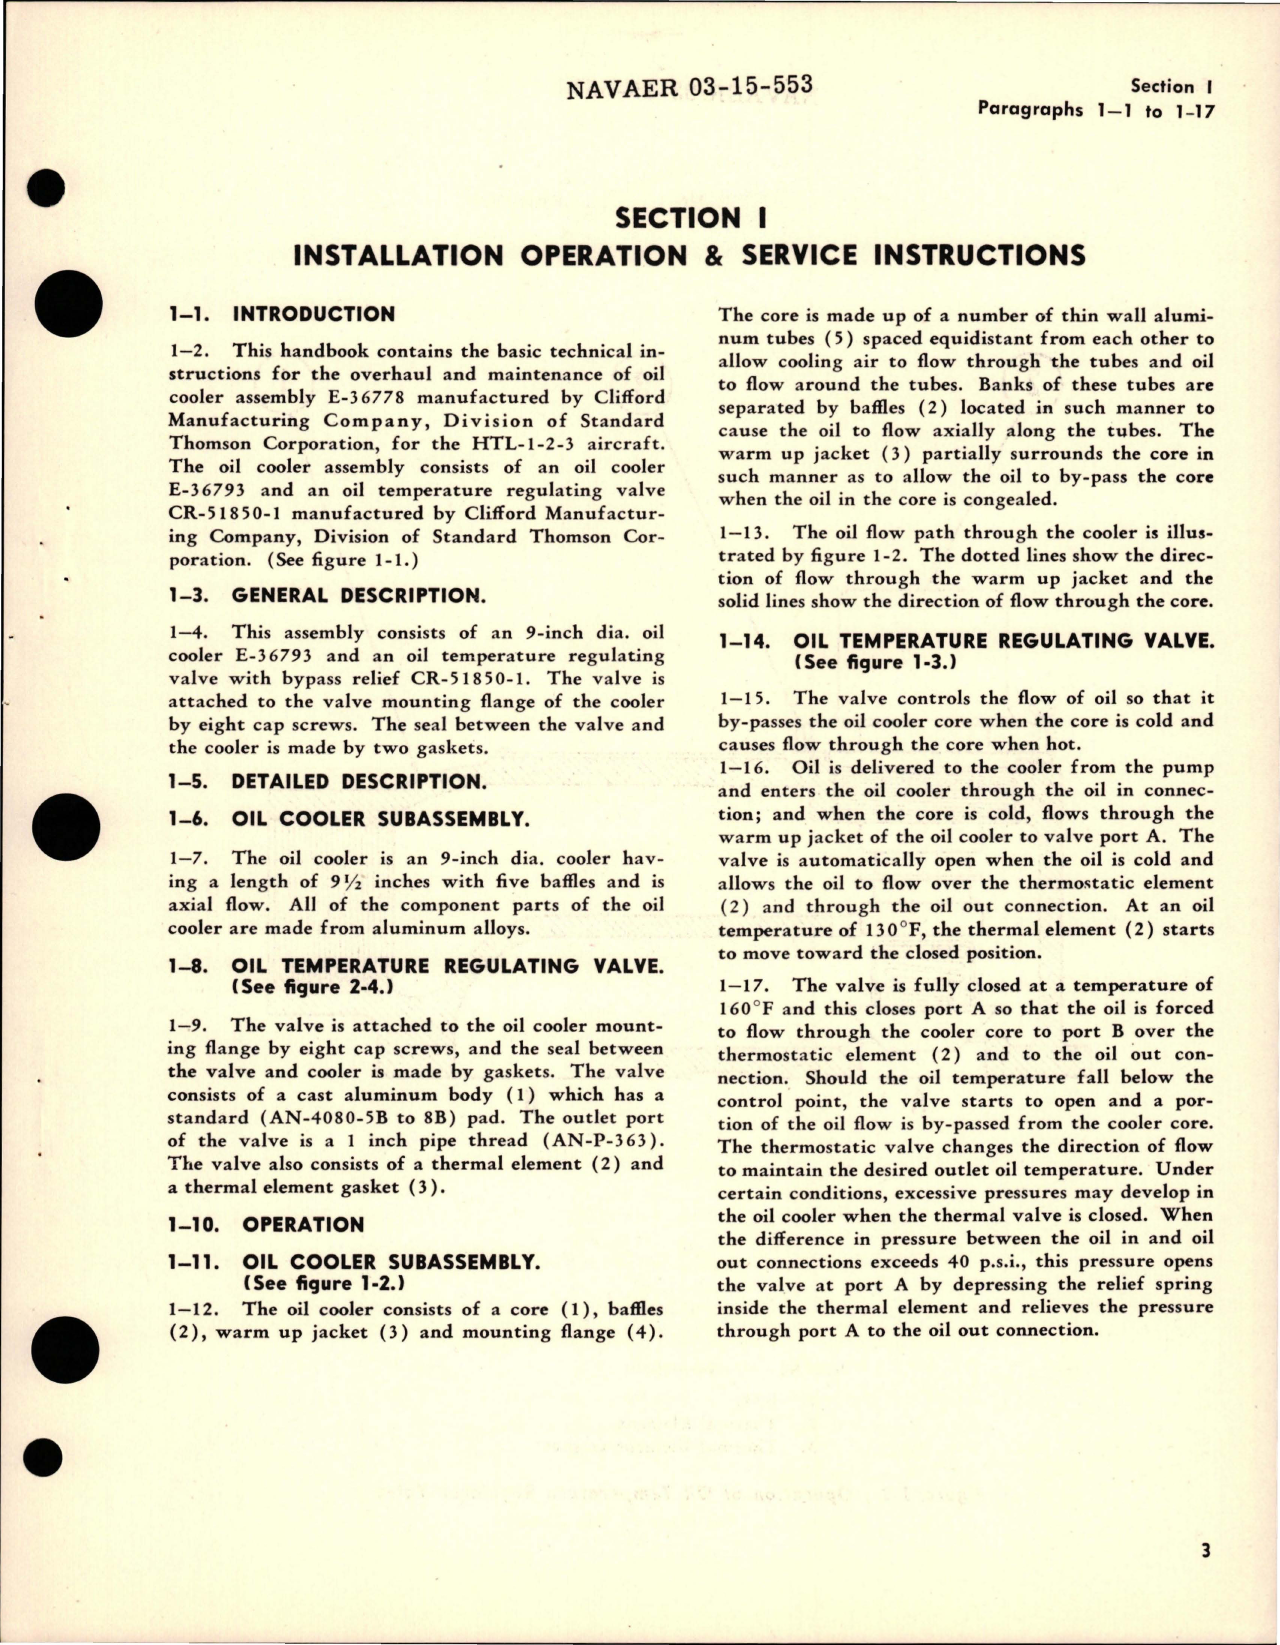 Sample page 5 from AirCorps Library document: Operation, Service and Overhaul Instructions with Parts for Oil Cooler Assembly - Model E-36778